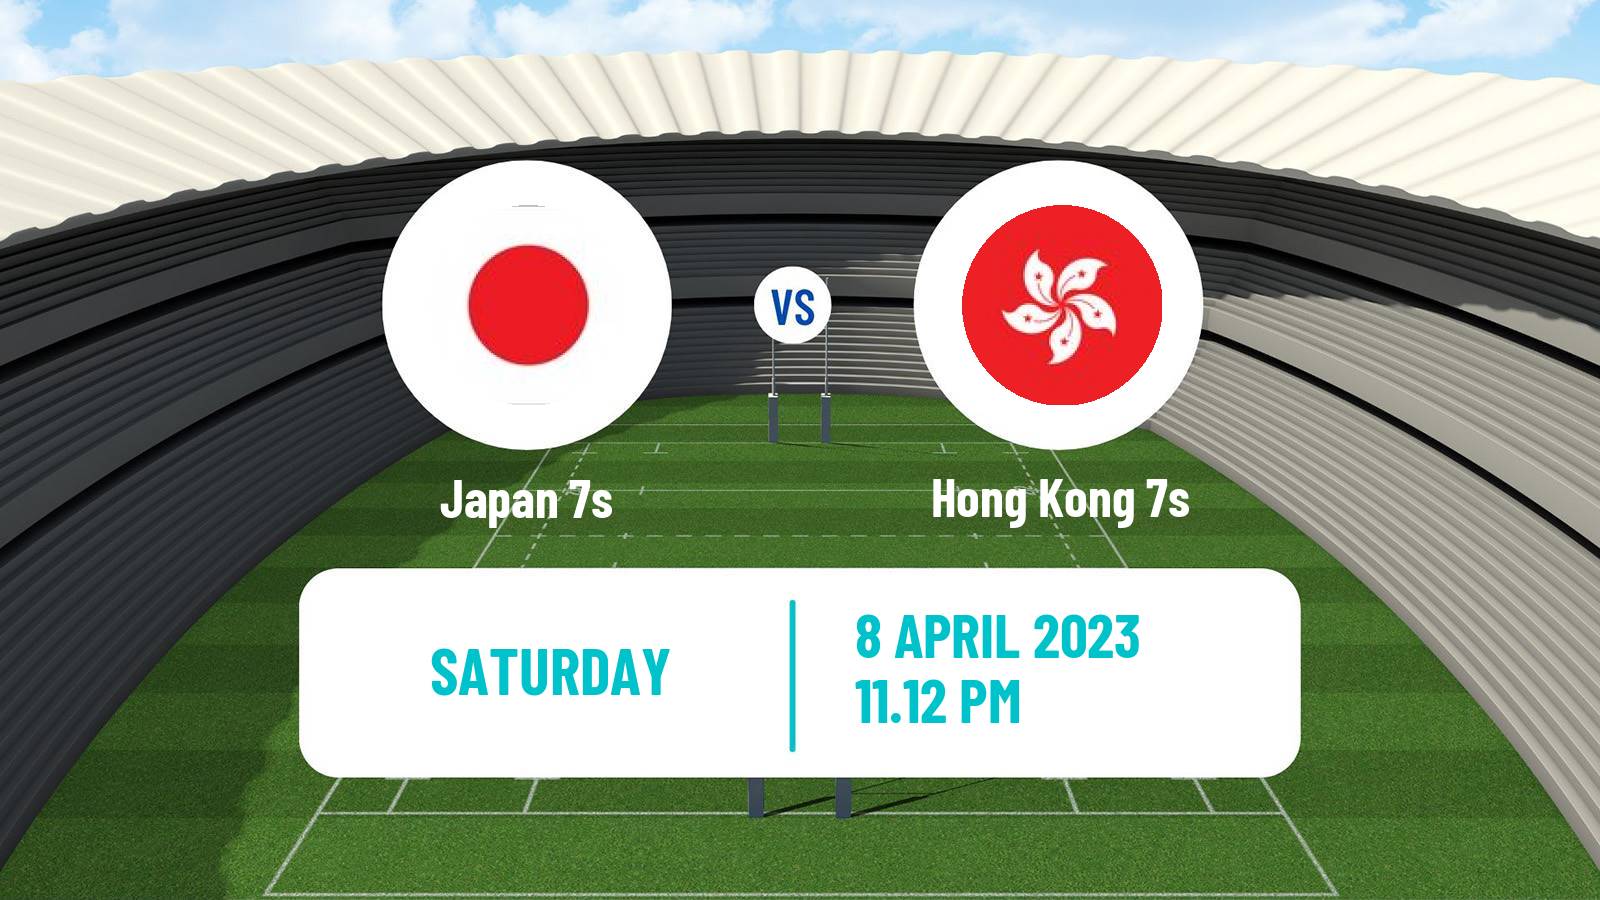 Rugby union Sevens World Series - Singapore Japan 7s - Hong Kong 7s